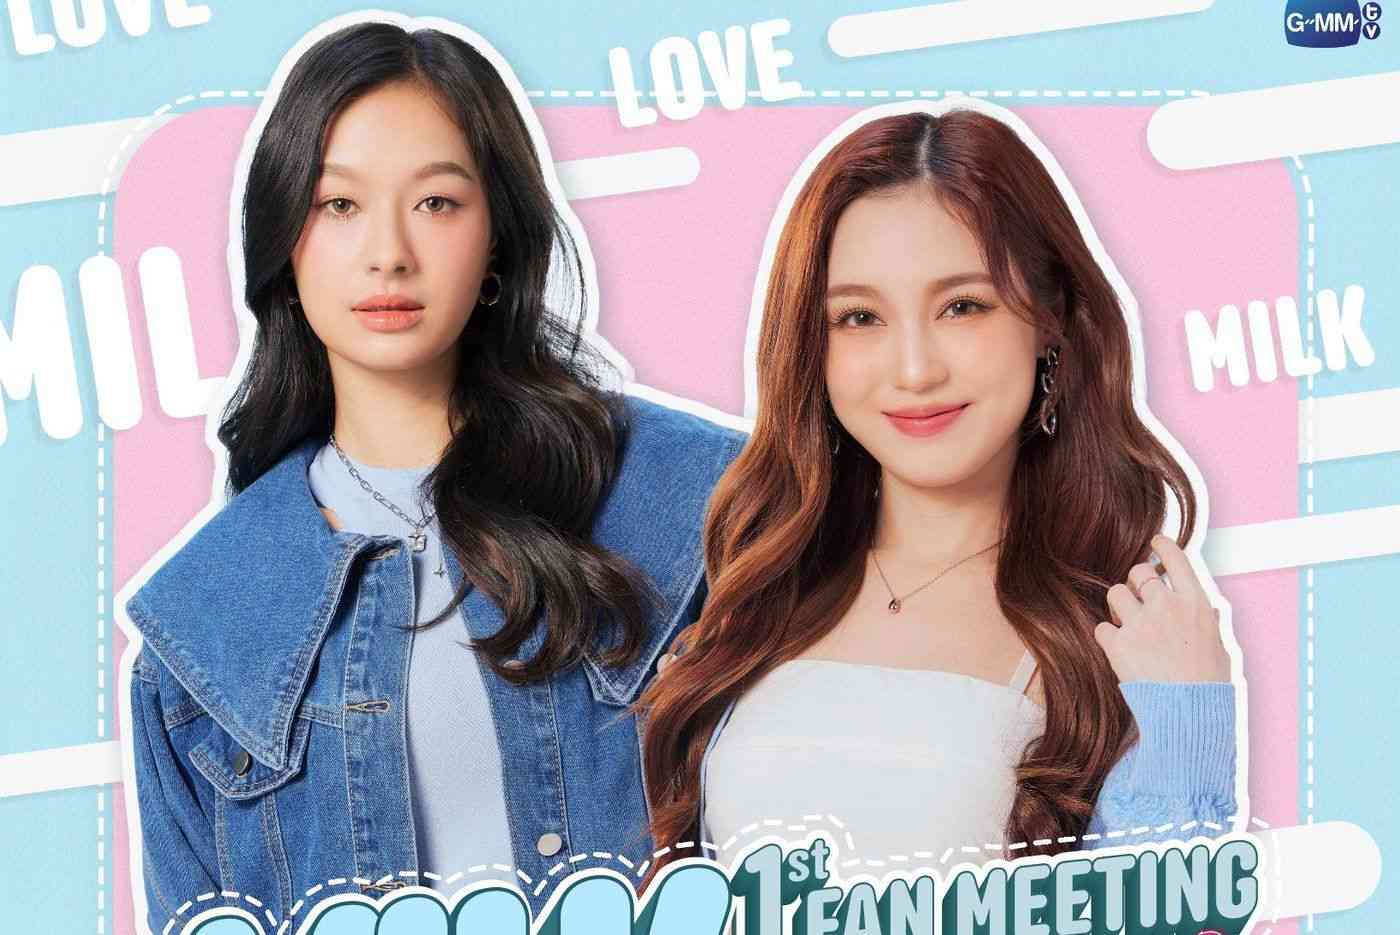 MilkLove, GMMTV’s flagship GL couple, is set to thrill Manila fans